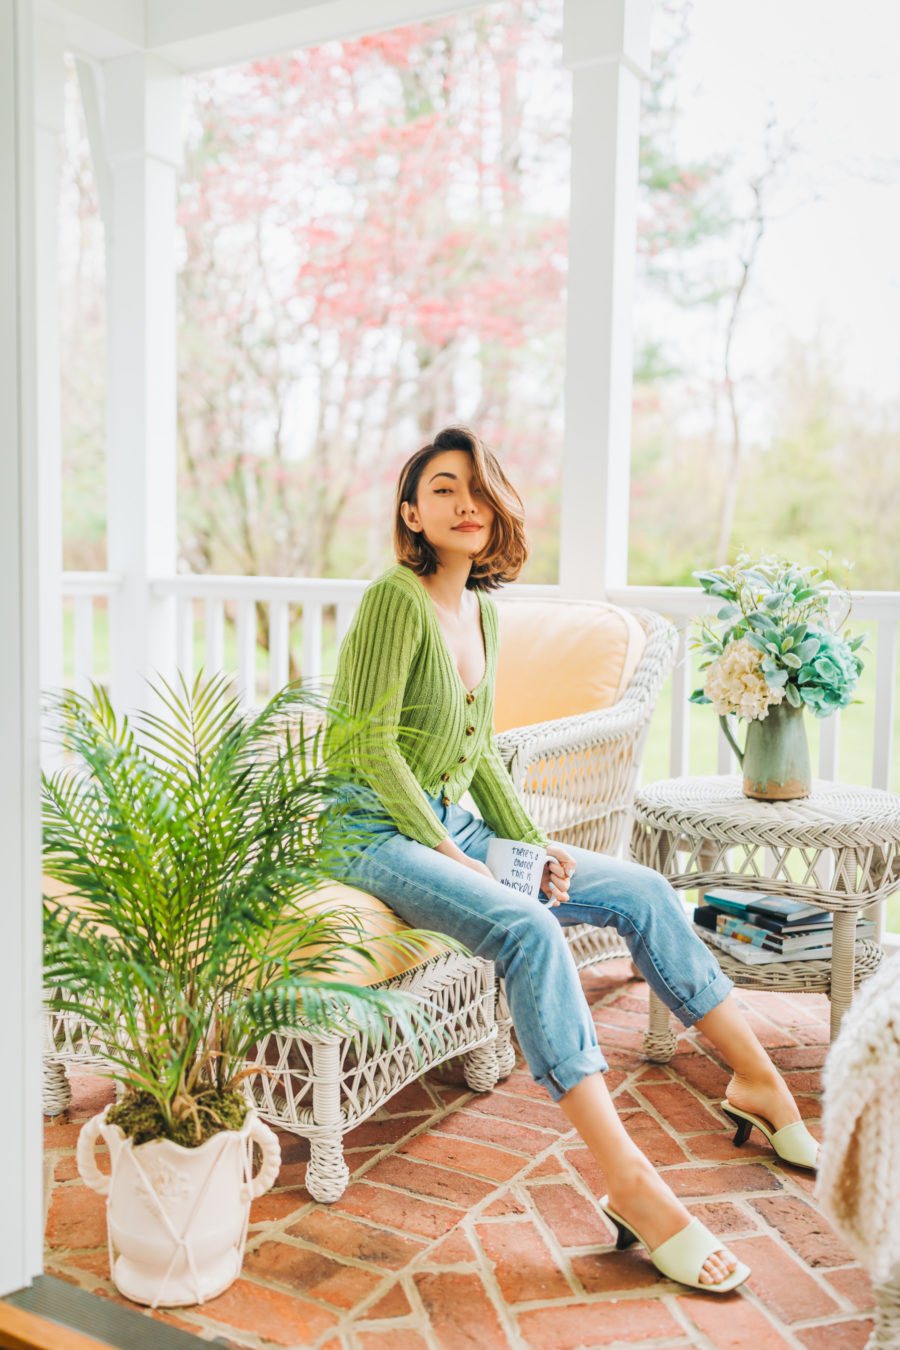 fashion blogger jessica wang sits in backyard patio and shares her favorite amazon home items // Jessica Wang - Notjessfashion.com